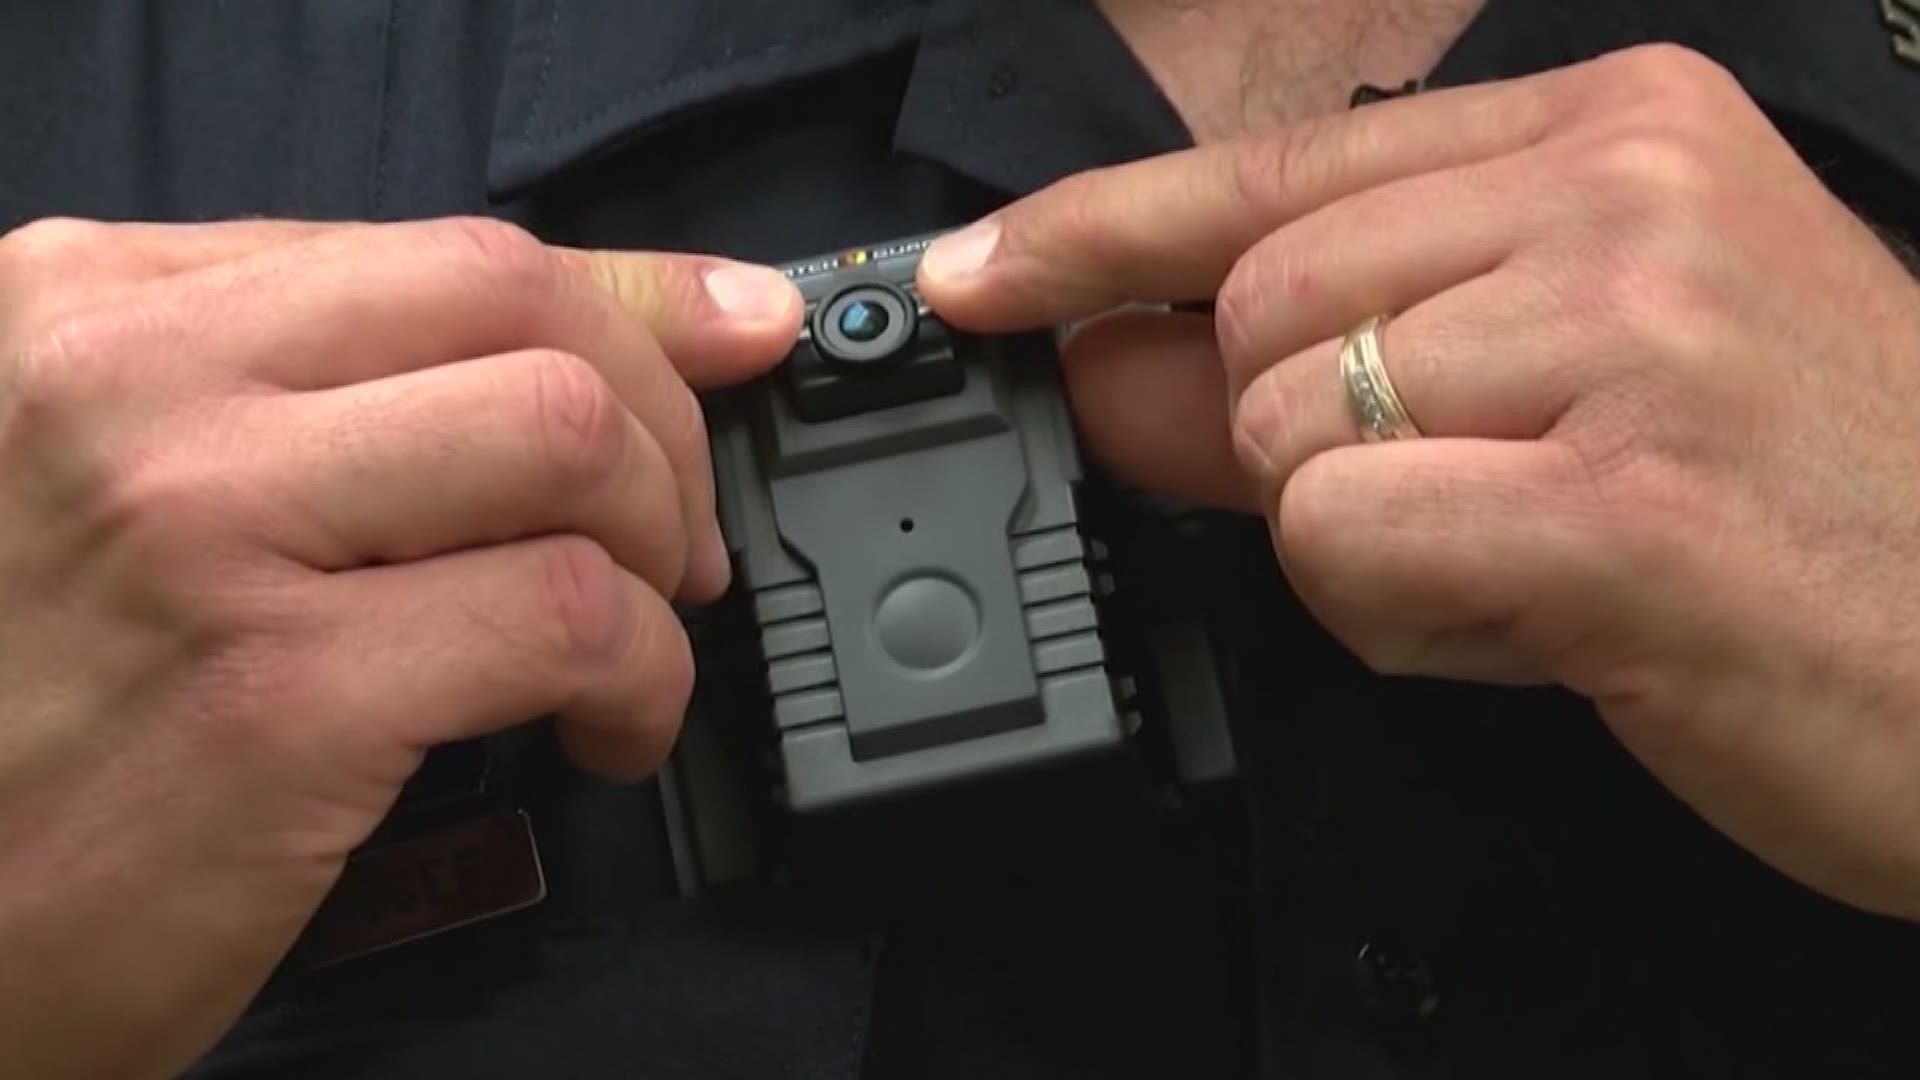 HPD's body-camera policy has been hotly debated since it was first introduced in April 2016.